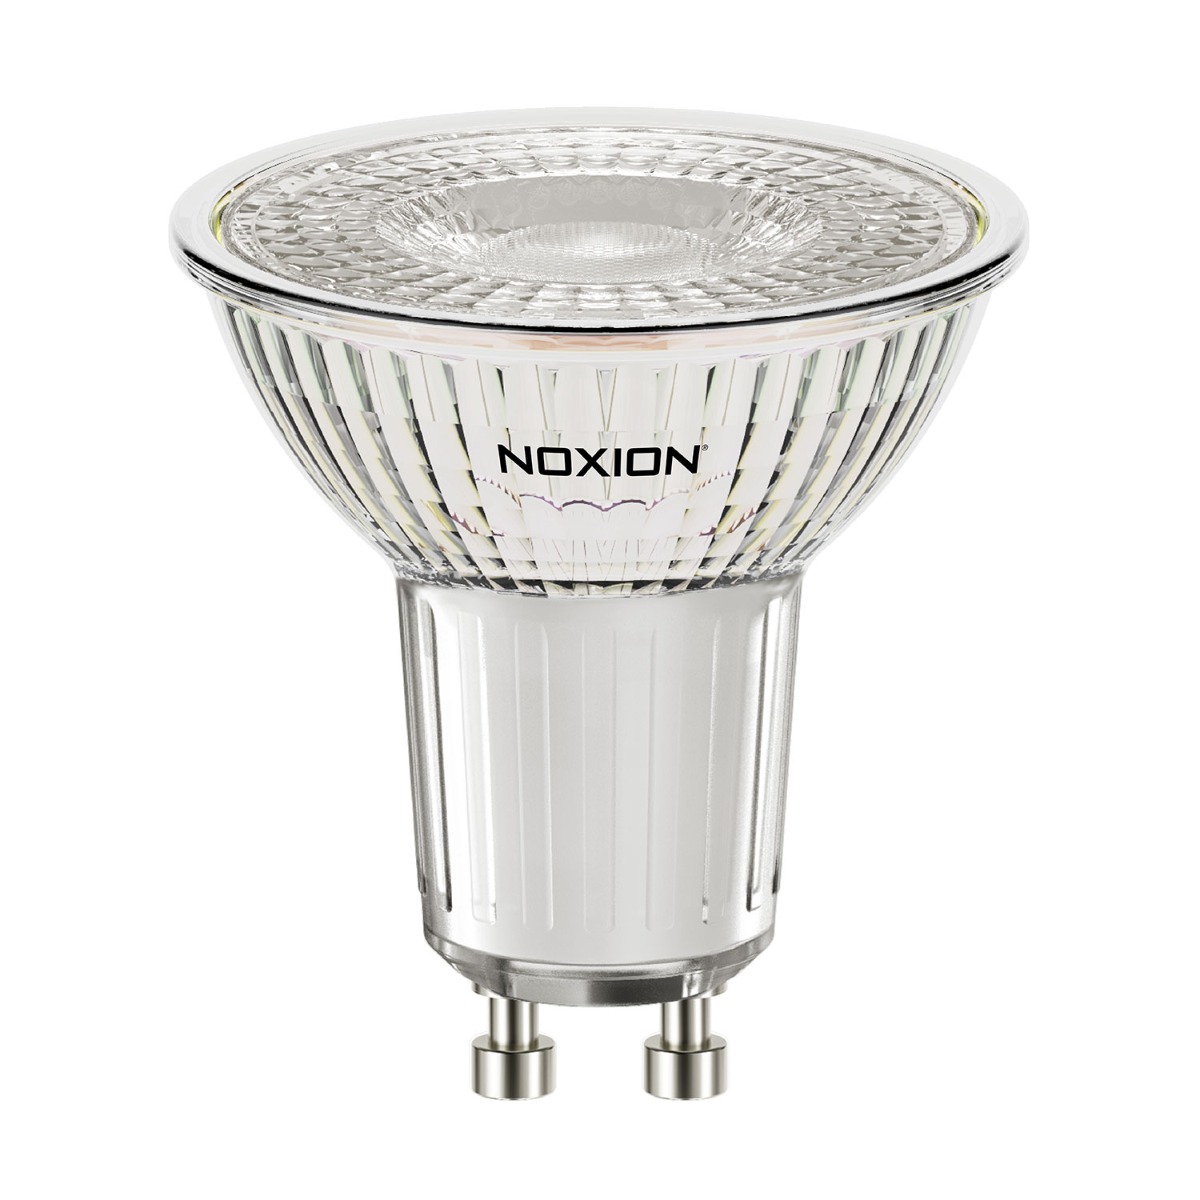 Noxion LED Spot GU10 3.2W 827 36D 310lm | Dimmable - Extra Warm White - Replaces 35W